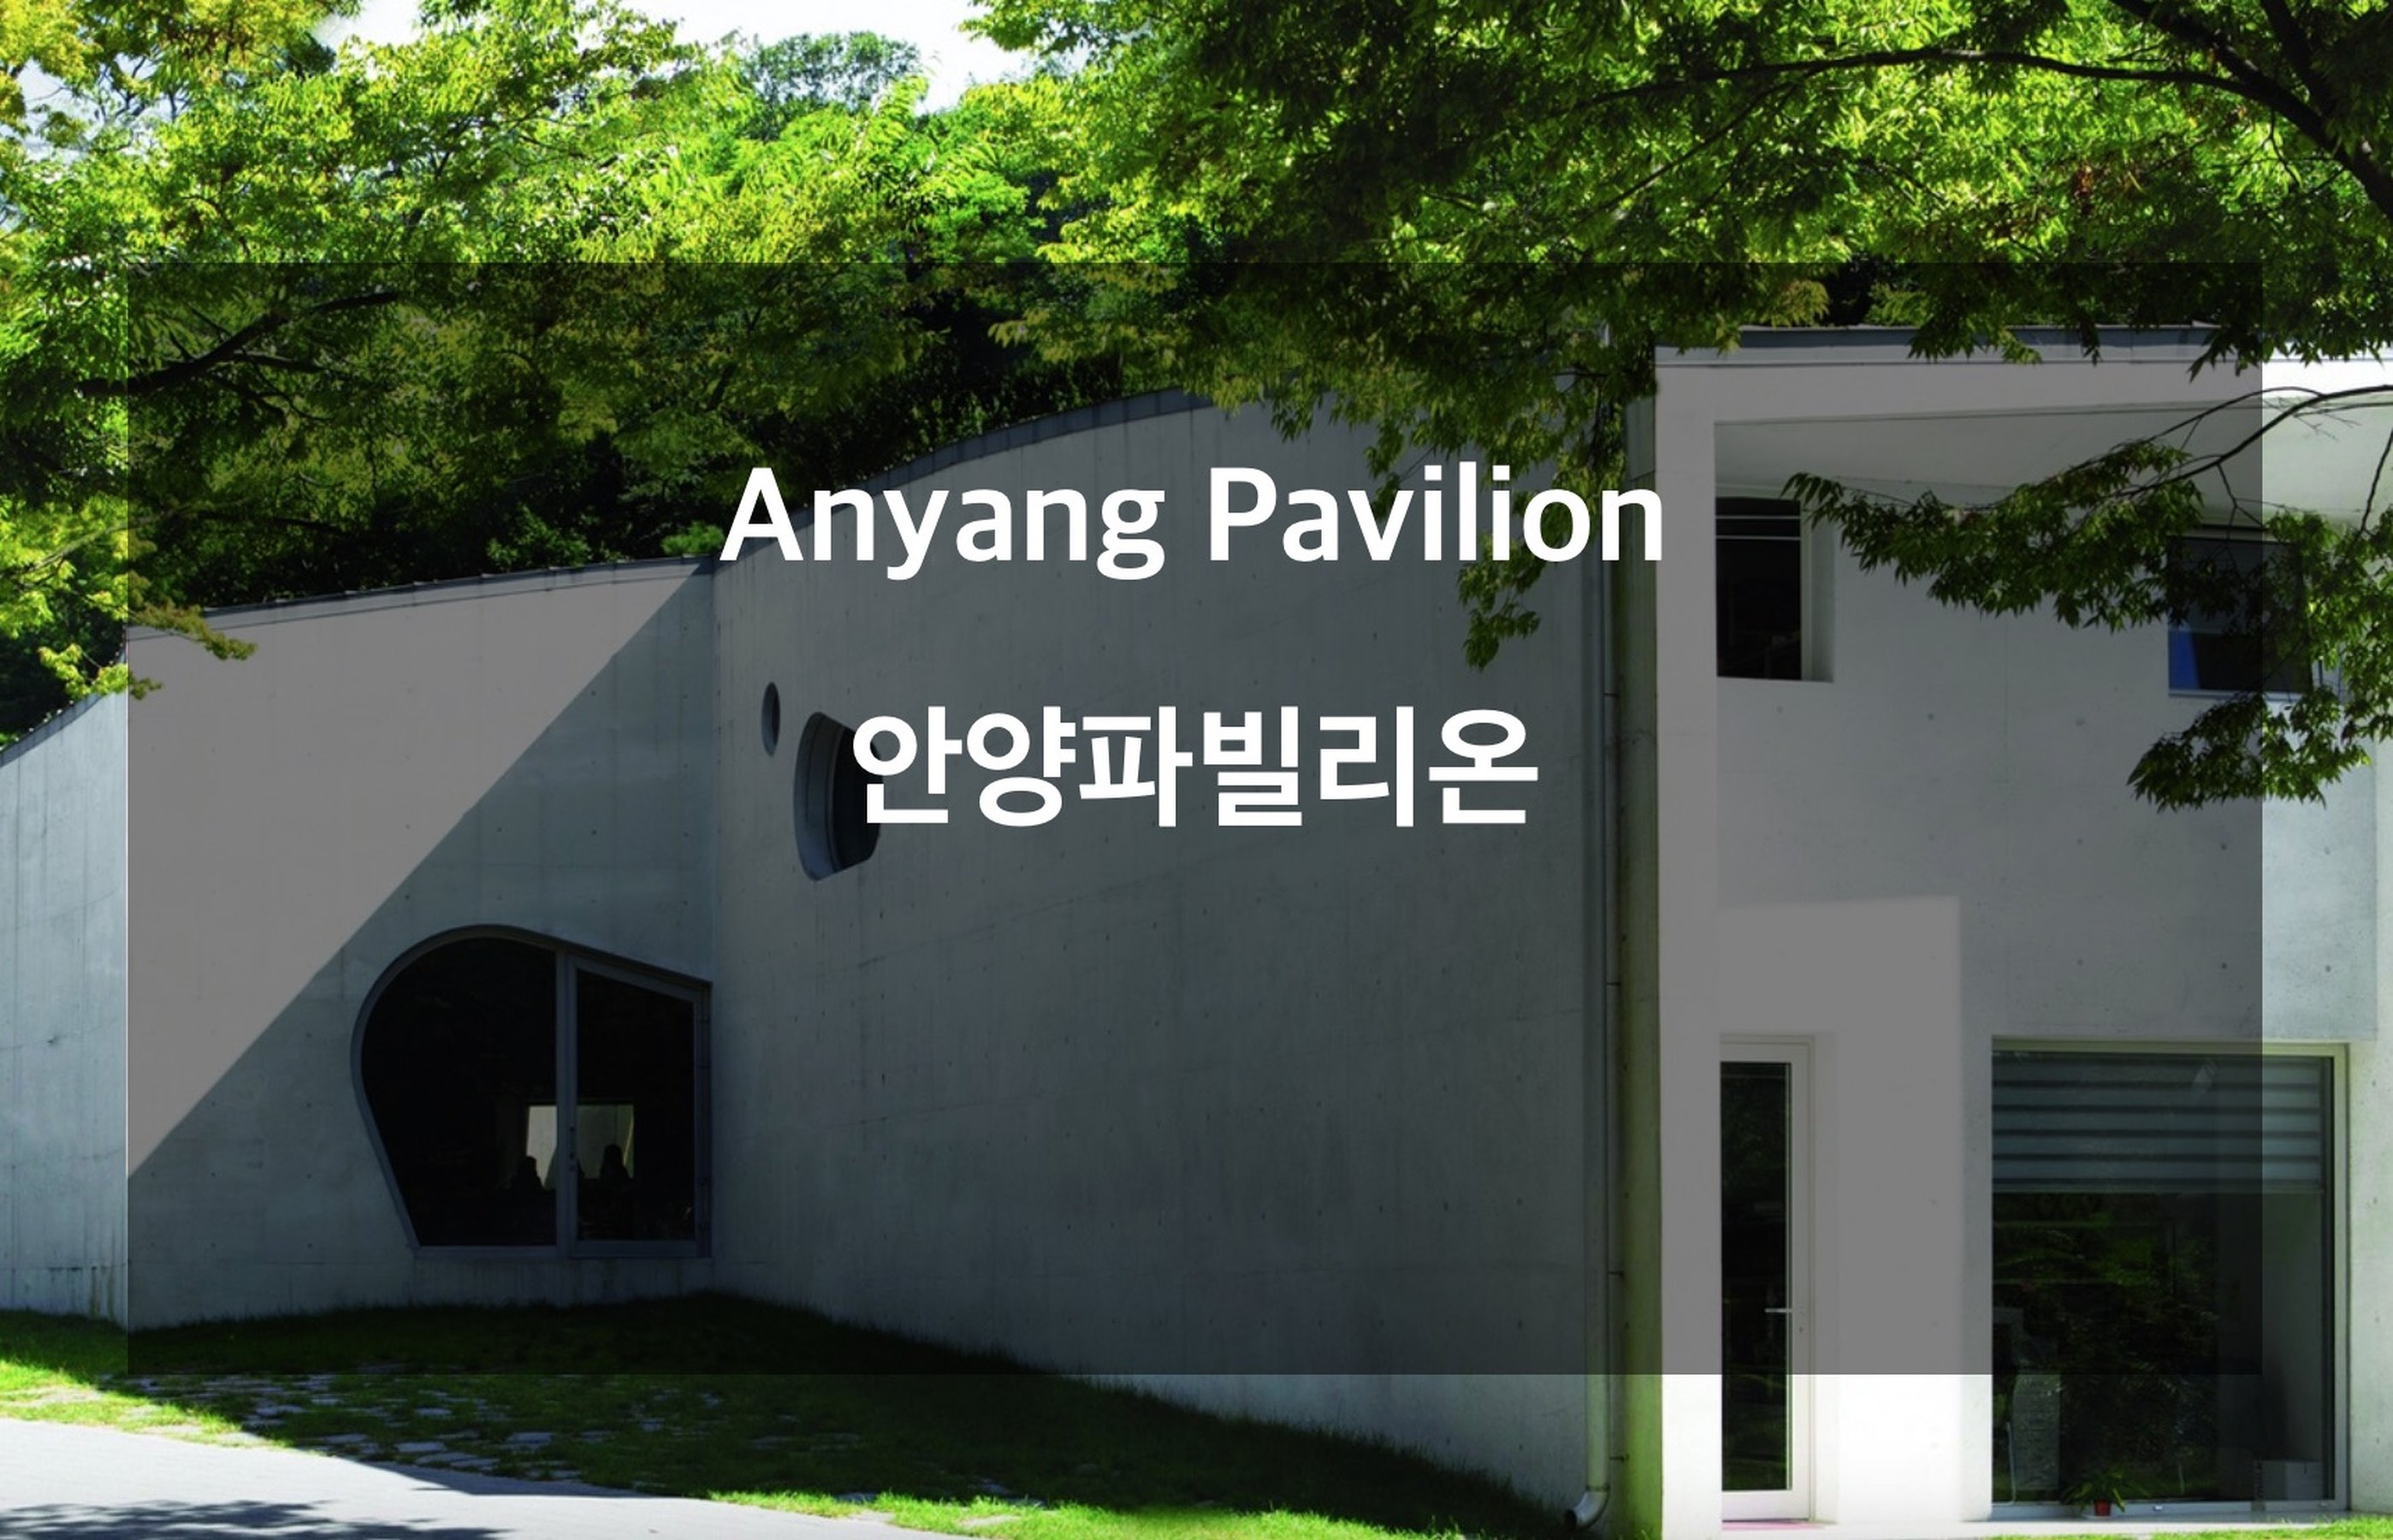 7th Anyang Public Art Project Zone 7 Your Imaginary Space